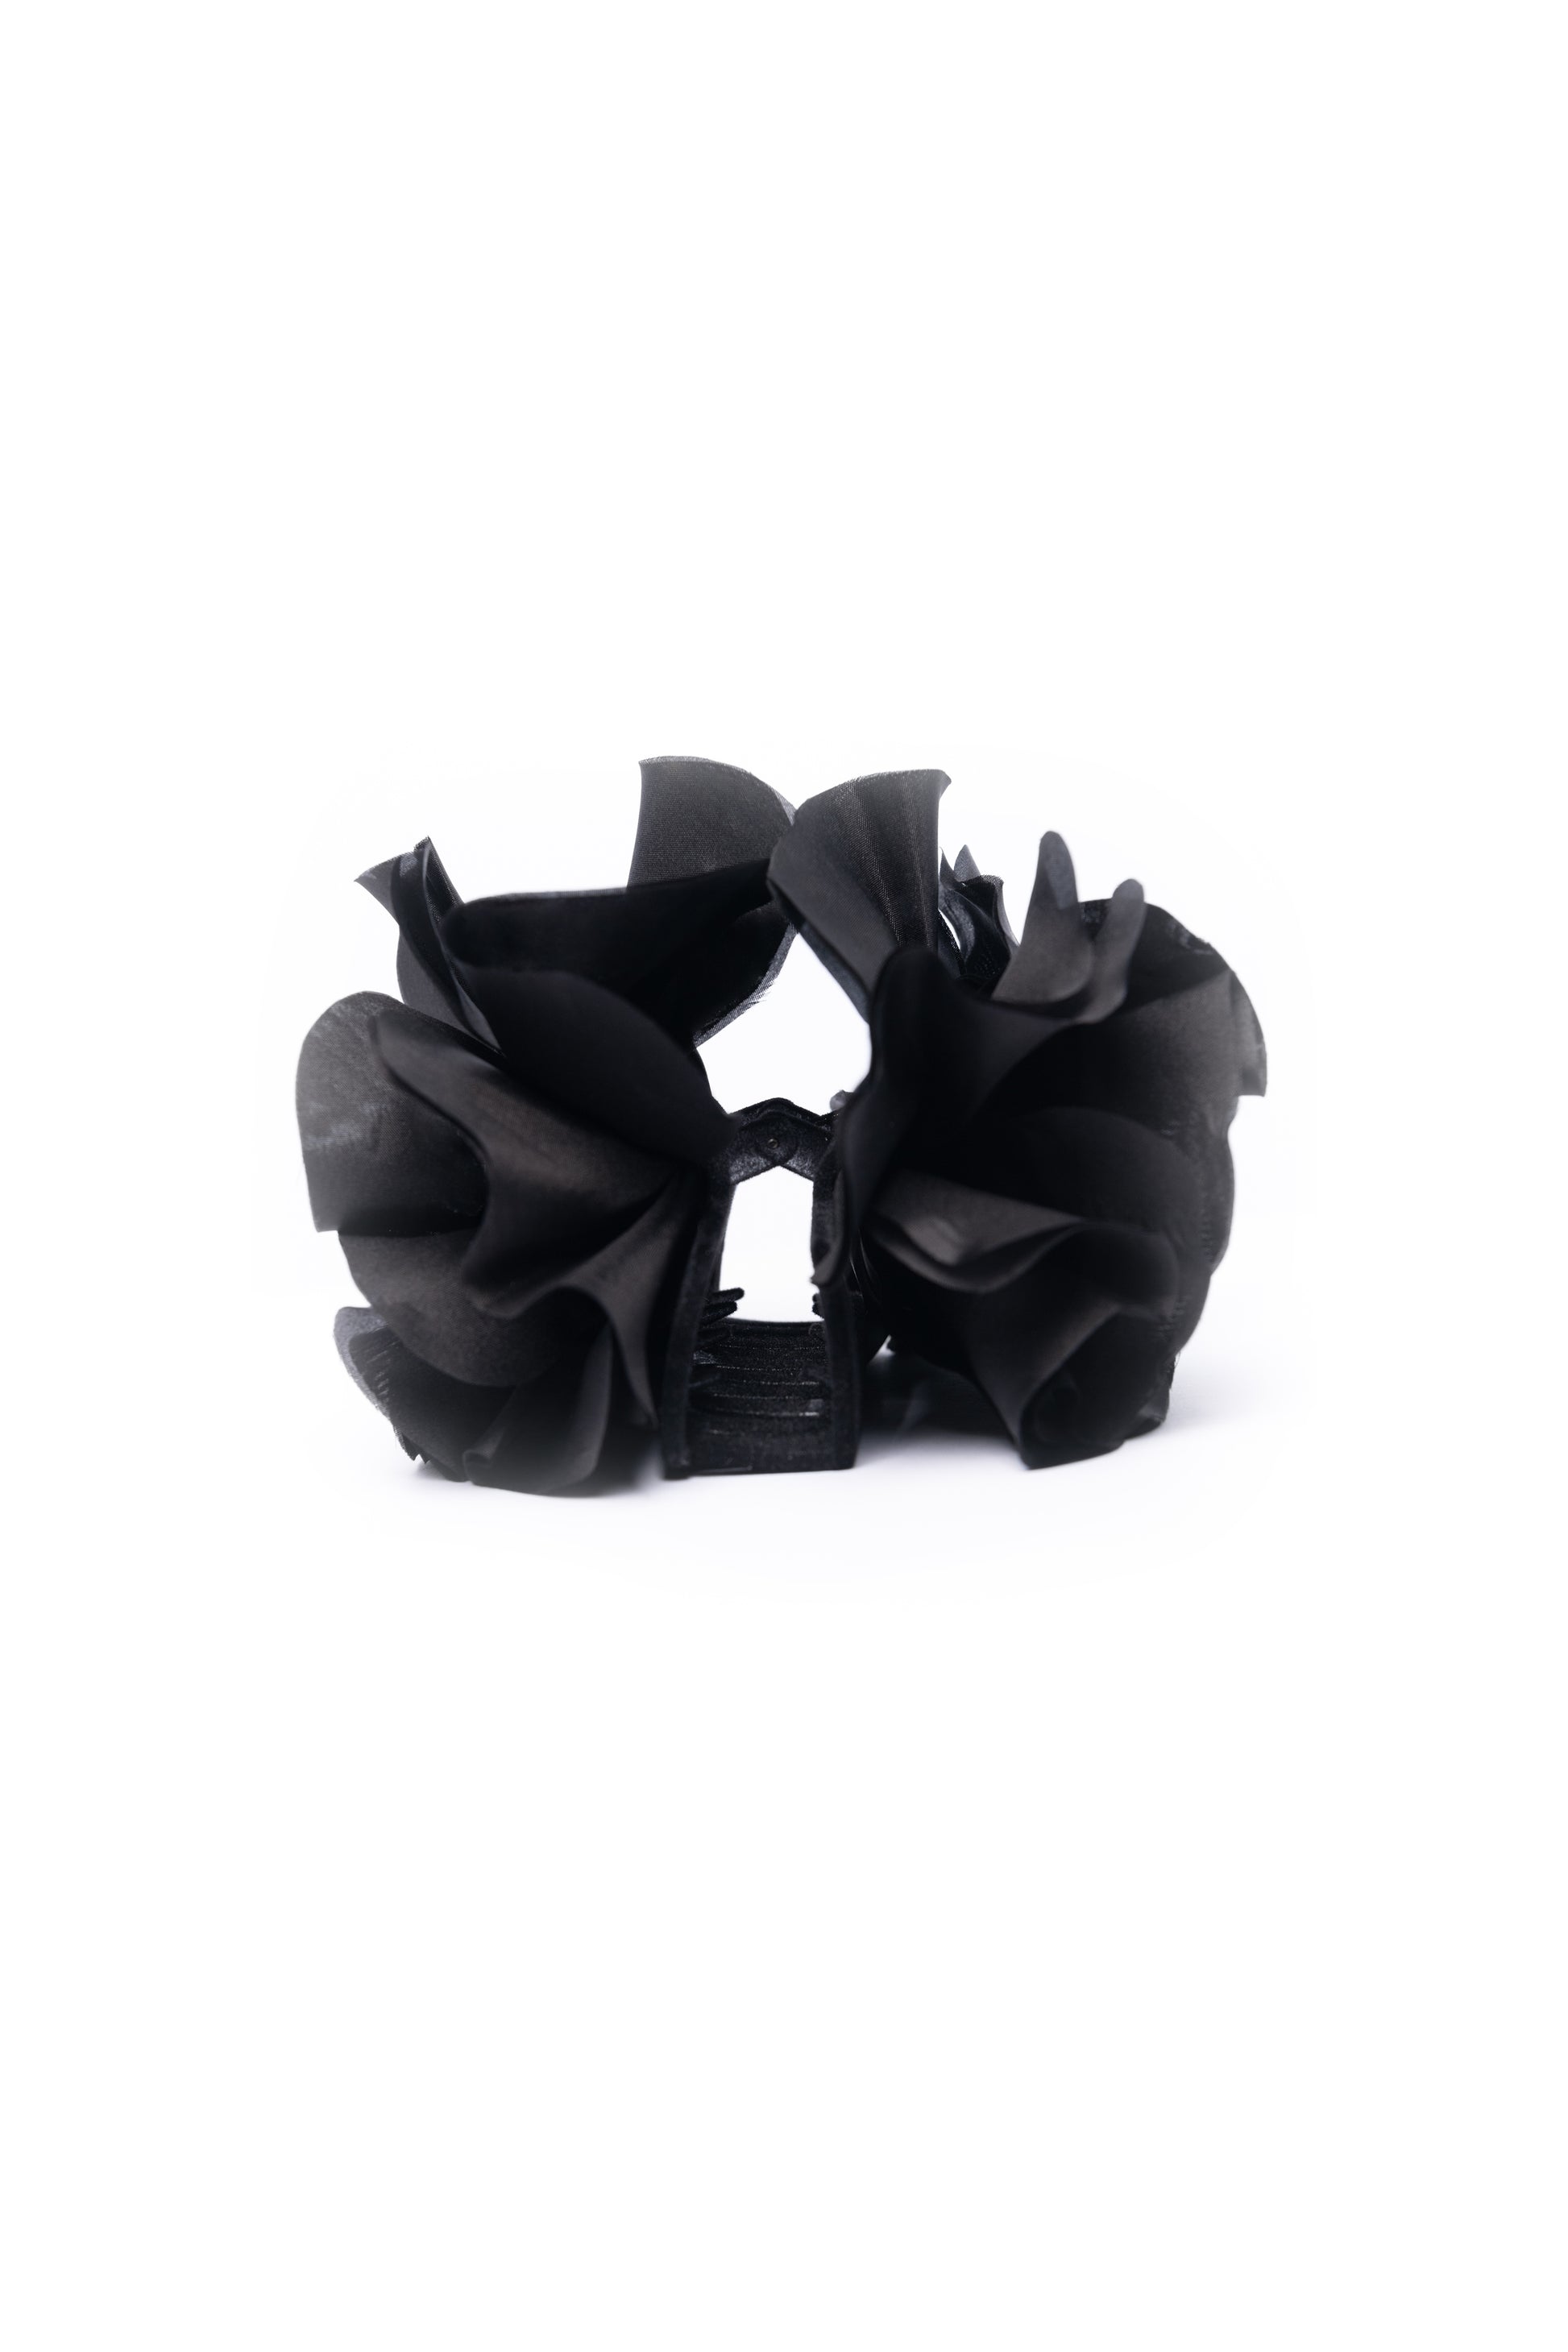 The Irish Twin - Anemone flower claw clip for hair - black Silk fabric - Made in France - Made in Paris - Handmade in Paris - Designed in Paris - Handcrafted - Be my Guest - Made to love and to last - Unique piece made by hand - original and special for Host Wear by The Irish Twin - created by Jill Bauwens